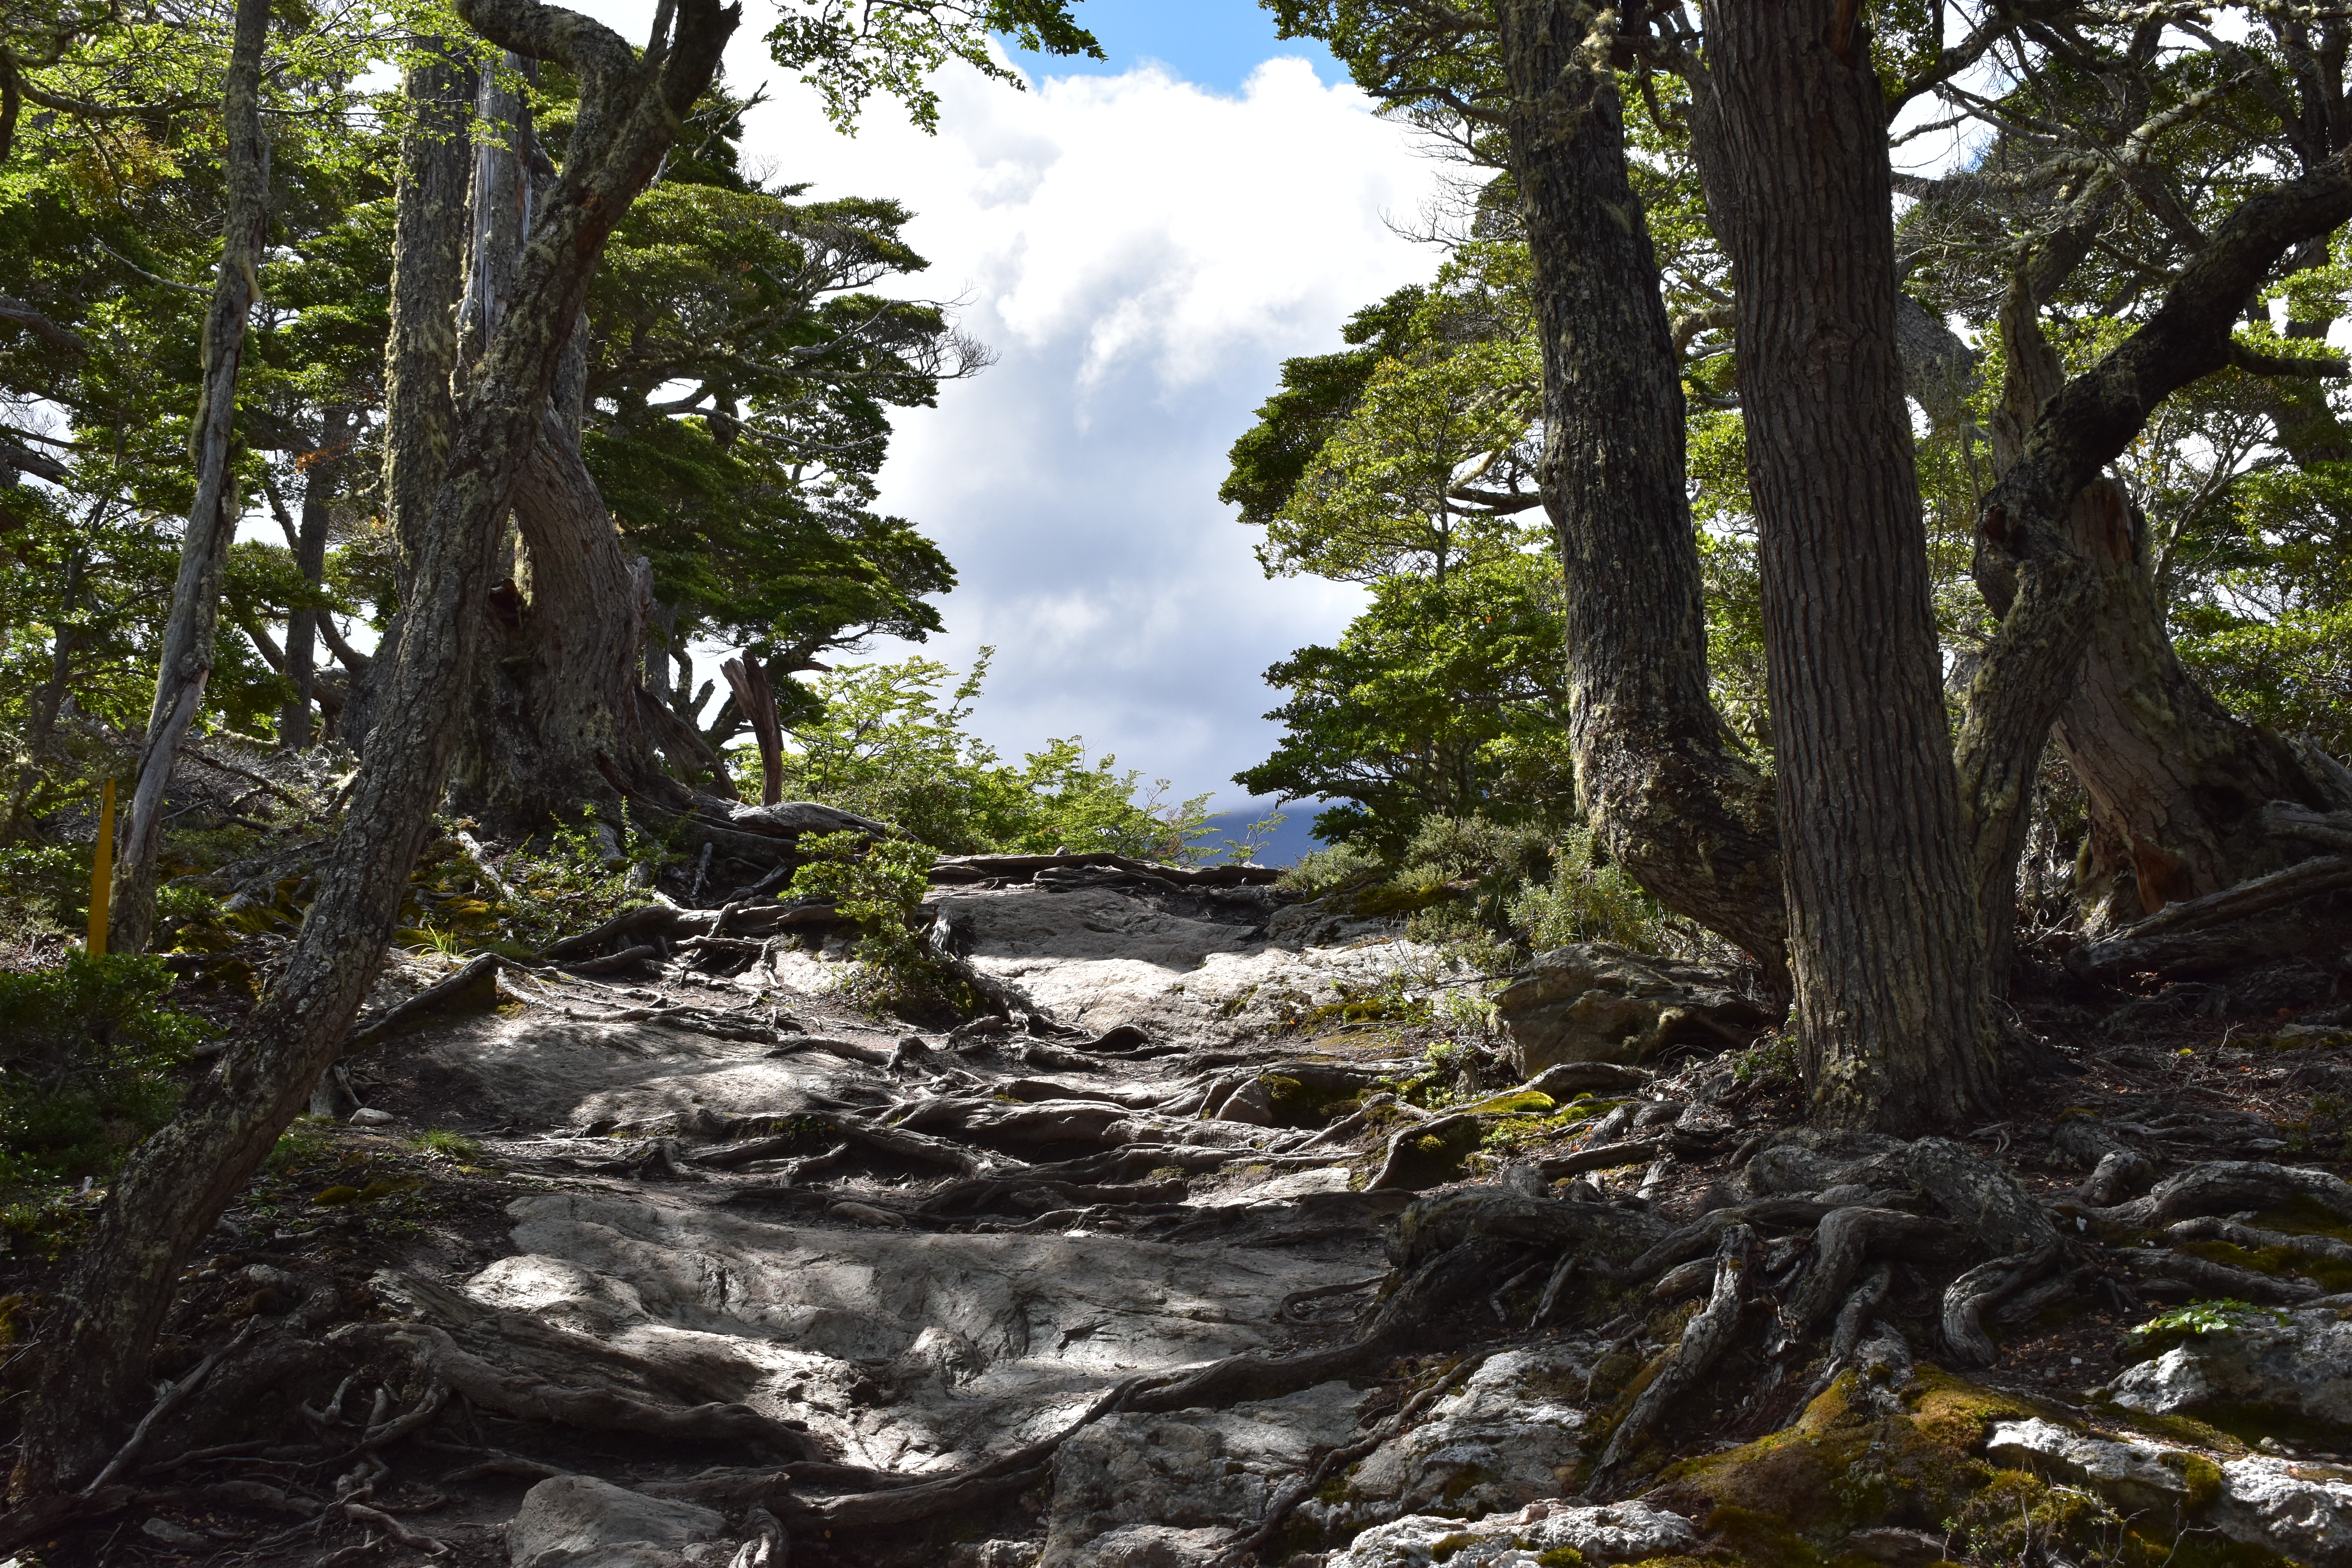 View from Trail in Tierra del Fuego National Park, Argentina. Feb. 5, 2020